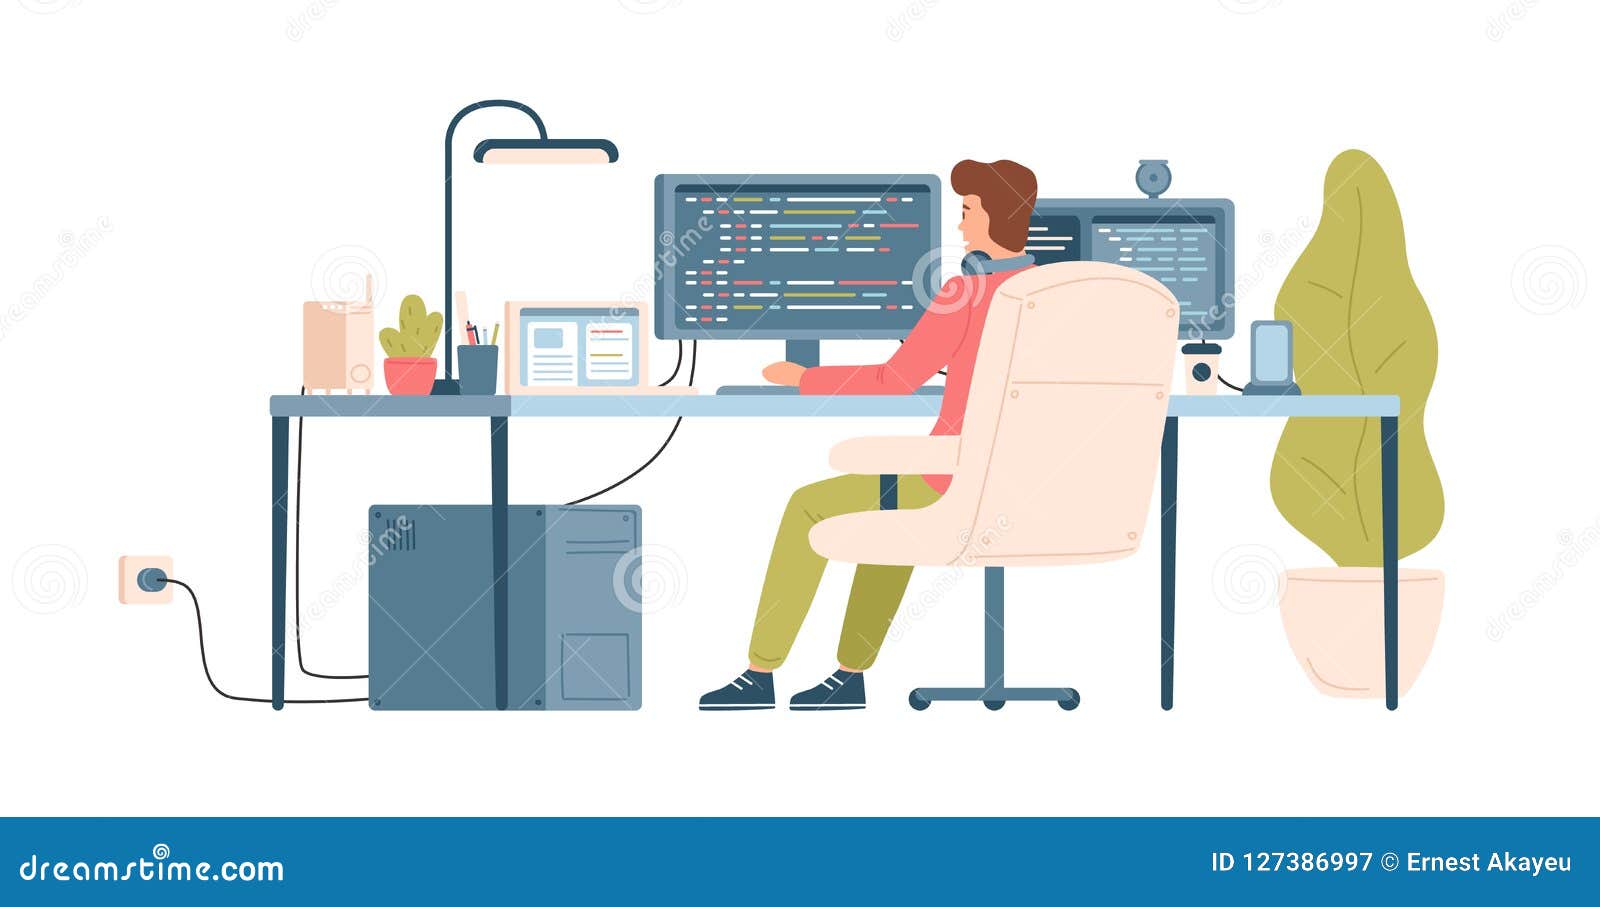 programmer, coder, web developer or software engineer sitting at desk and working on computer or programming. workplace